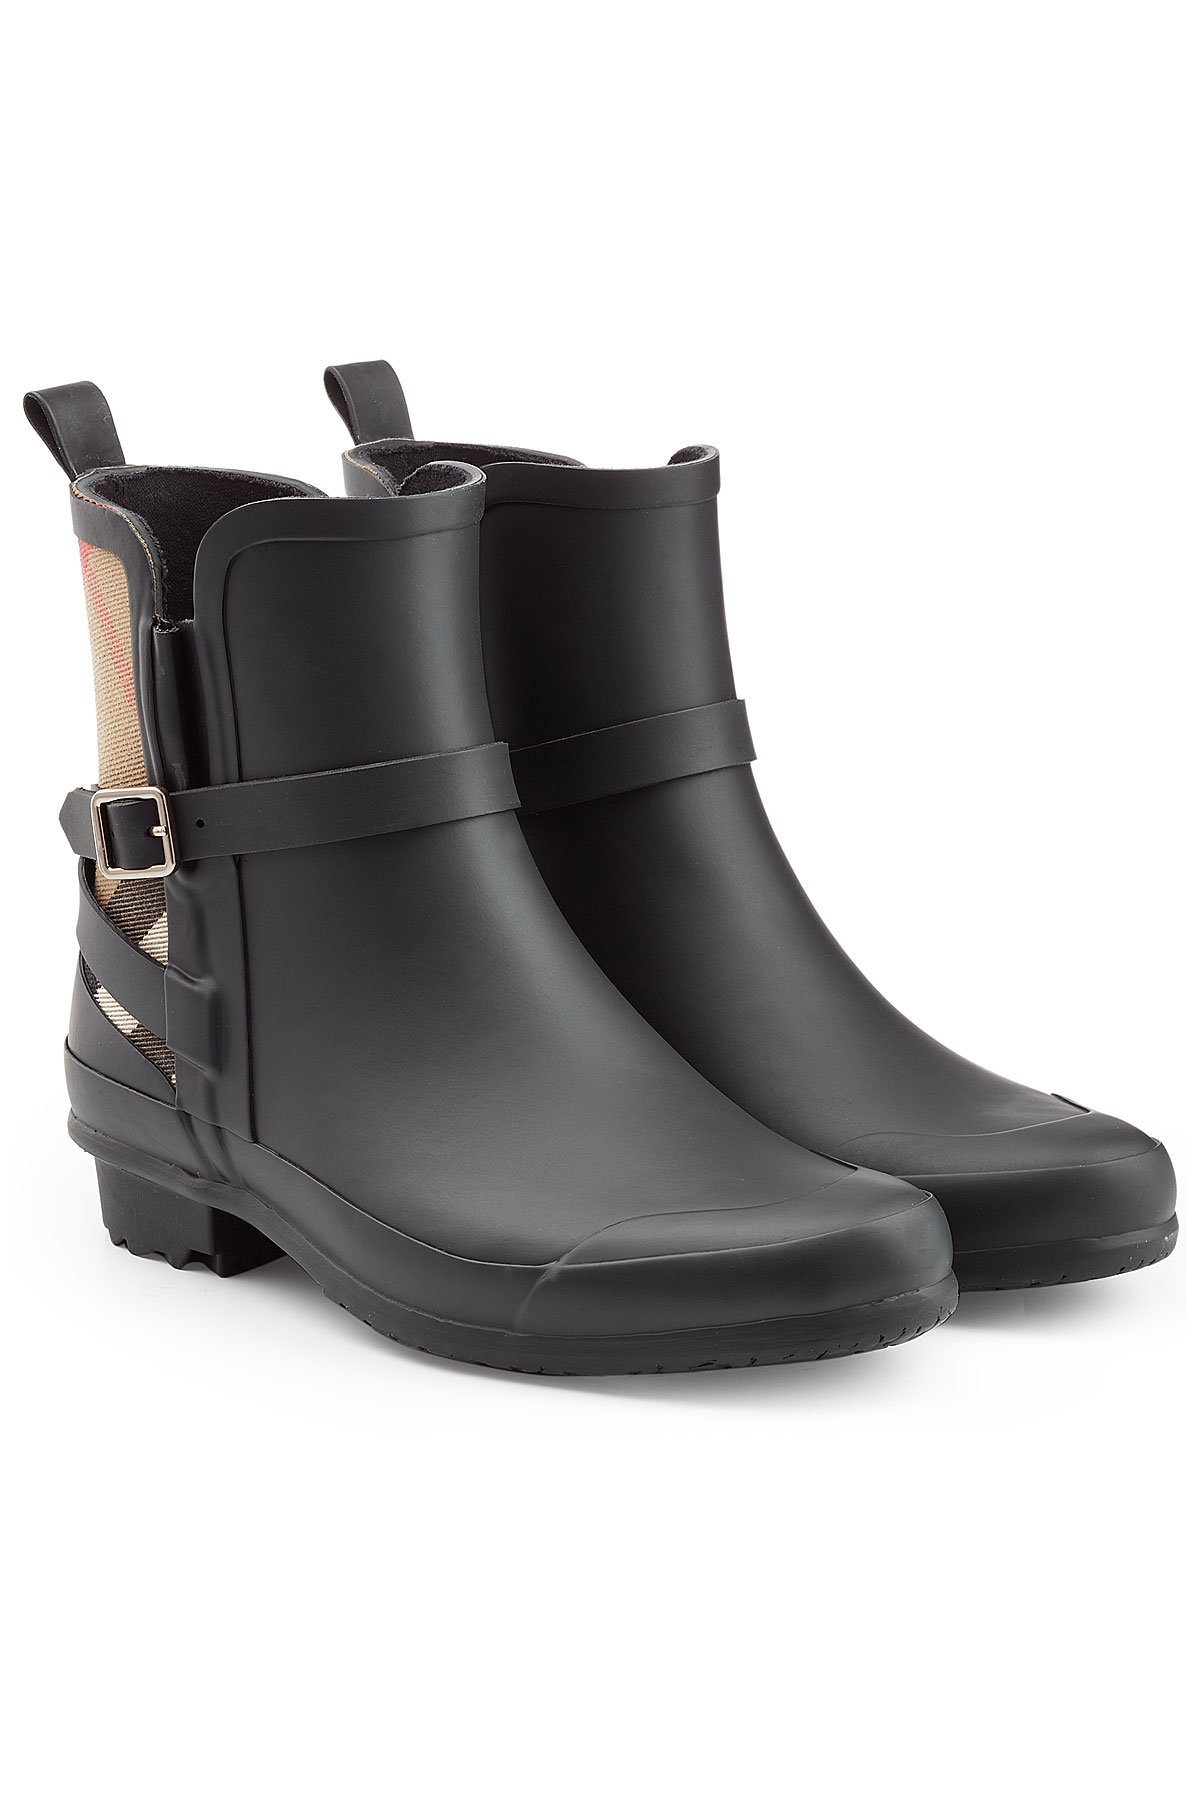 Burberry - Matte Rubber Rain Boots with Check Panel